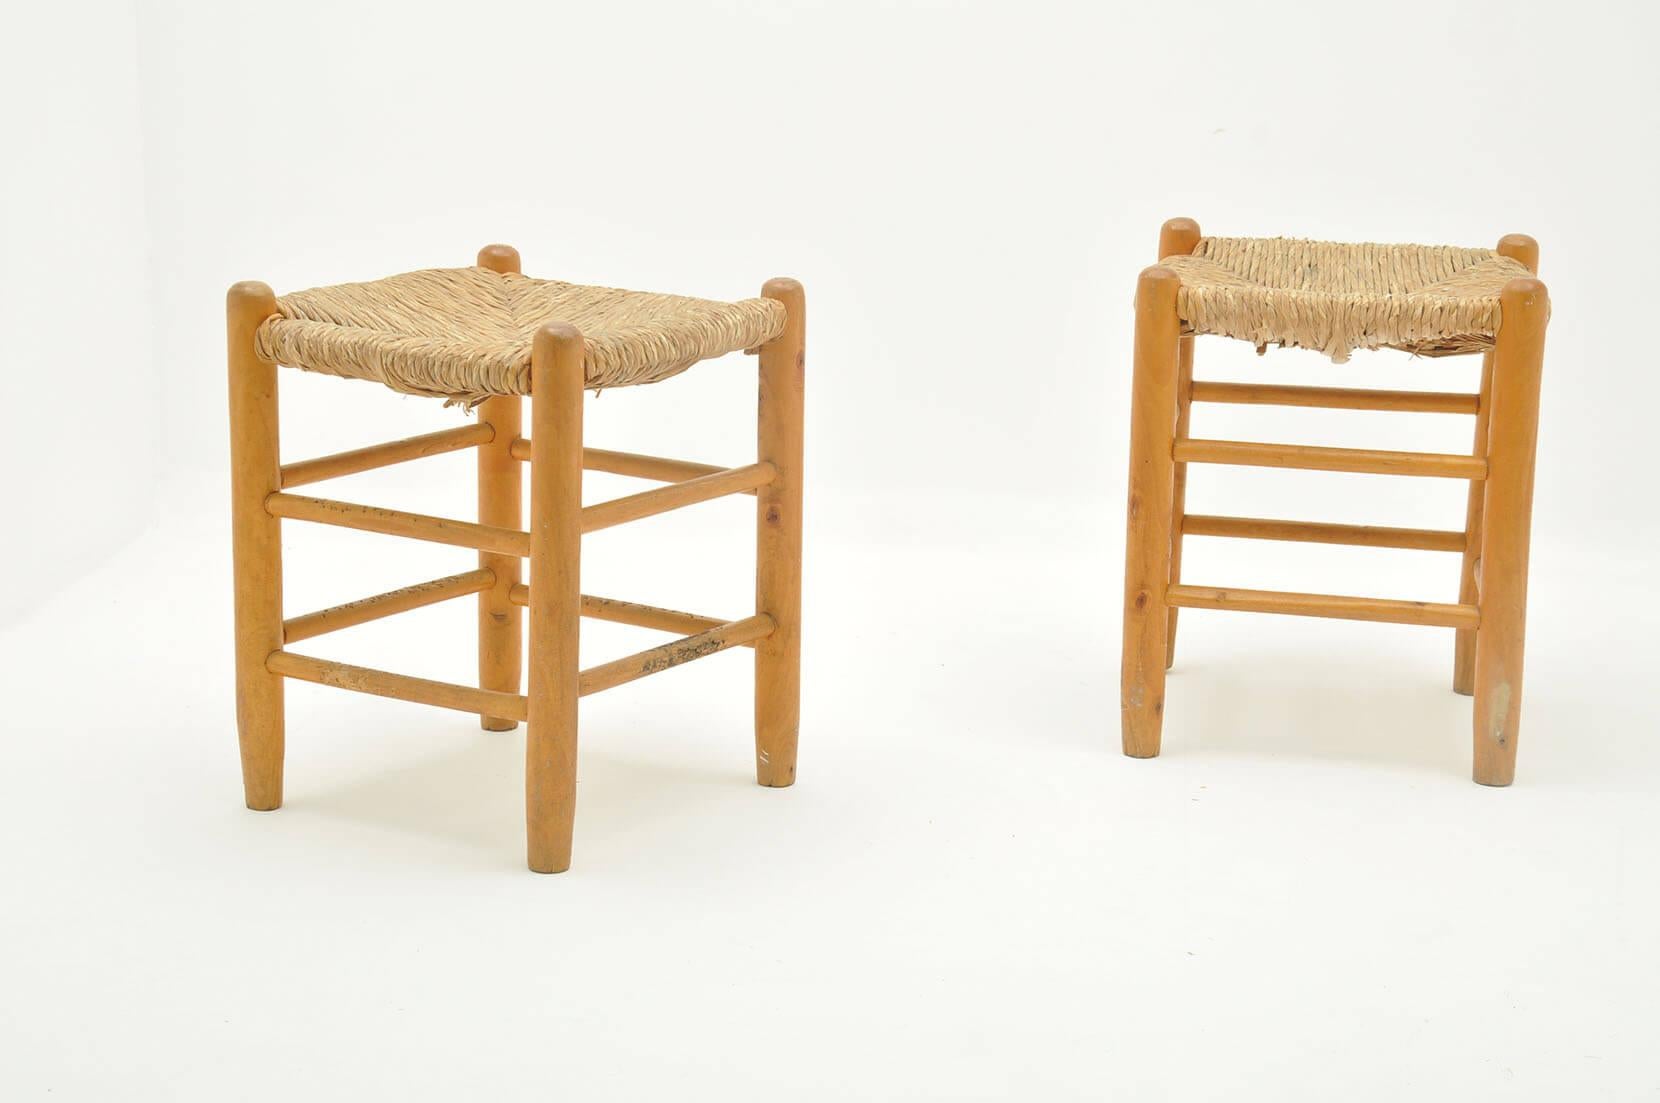 Pair of Wood and Staw Stools by Charlotte Perriand for L'équipement de la Maison 4